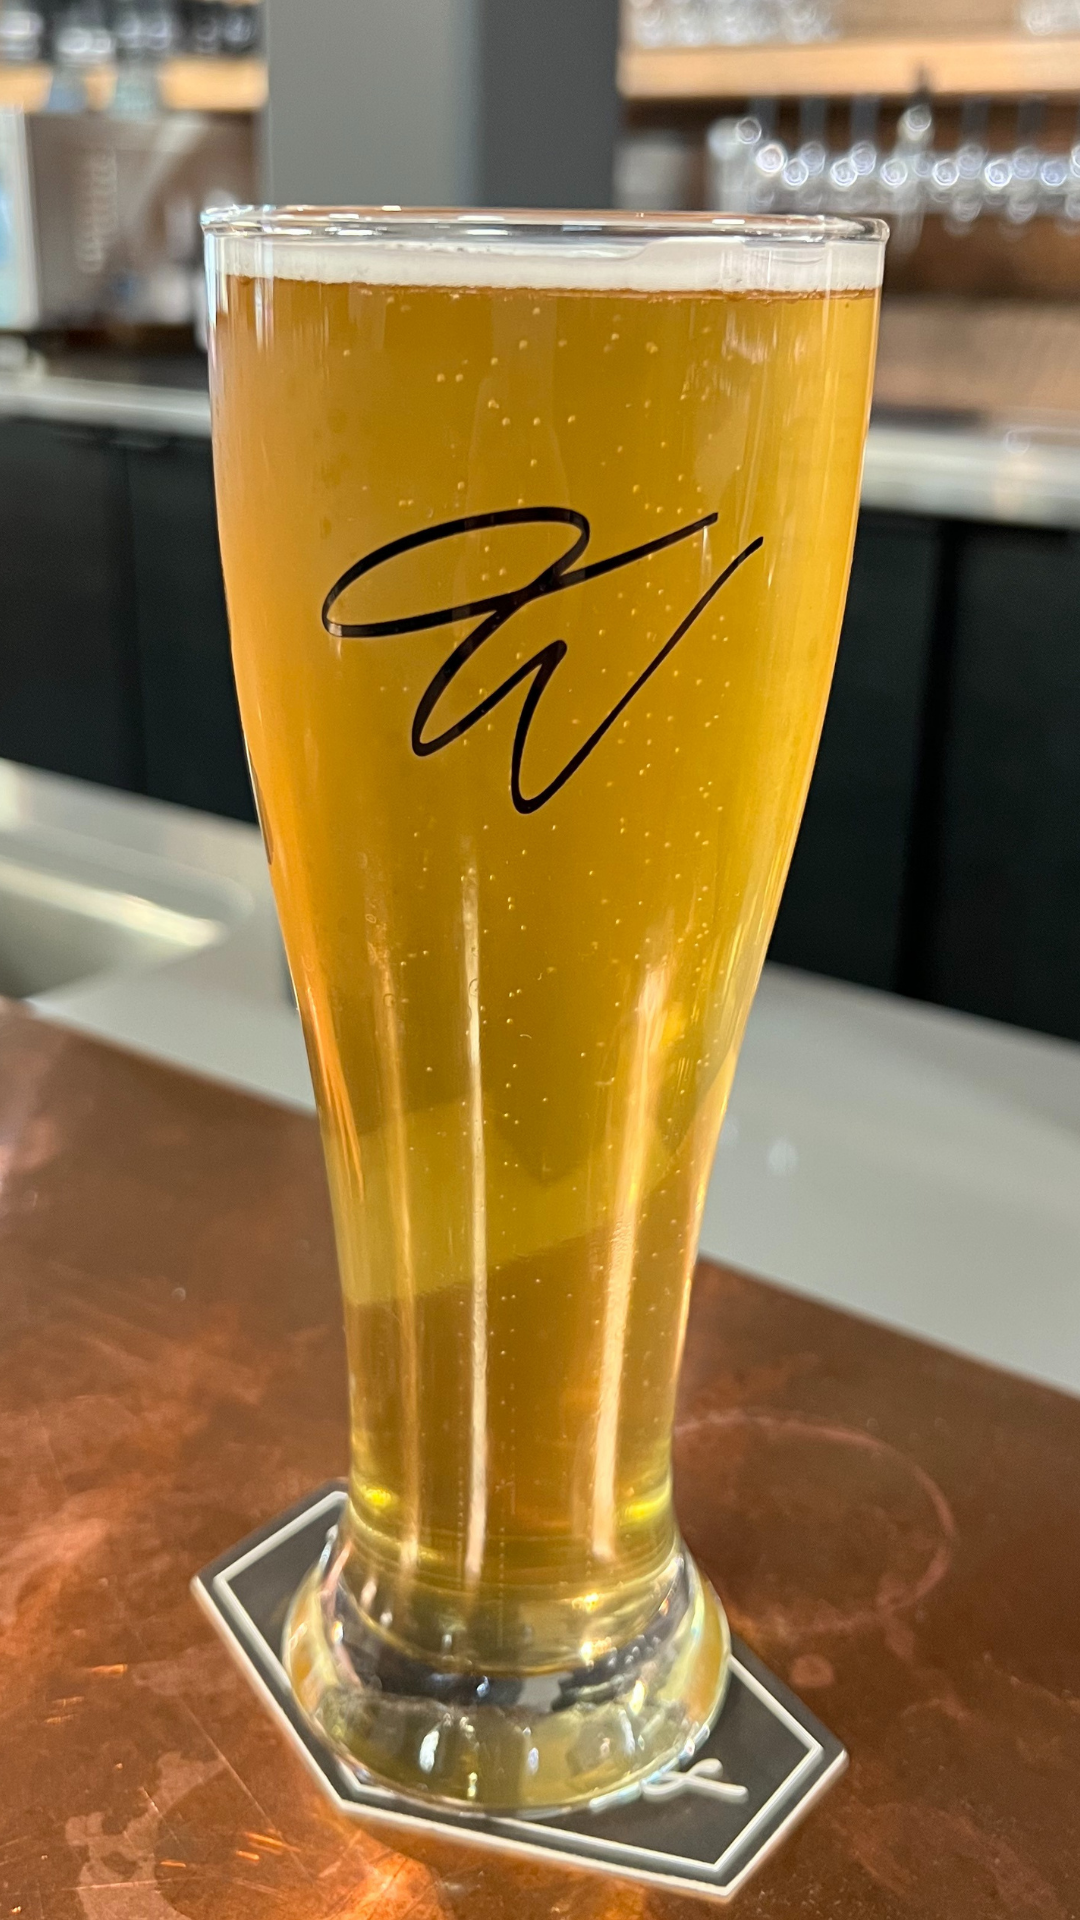 A glass of beer from Woody's Taphouse